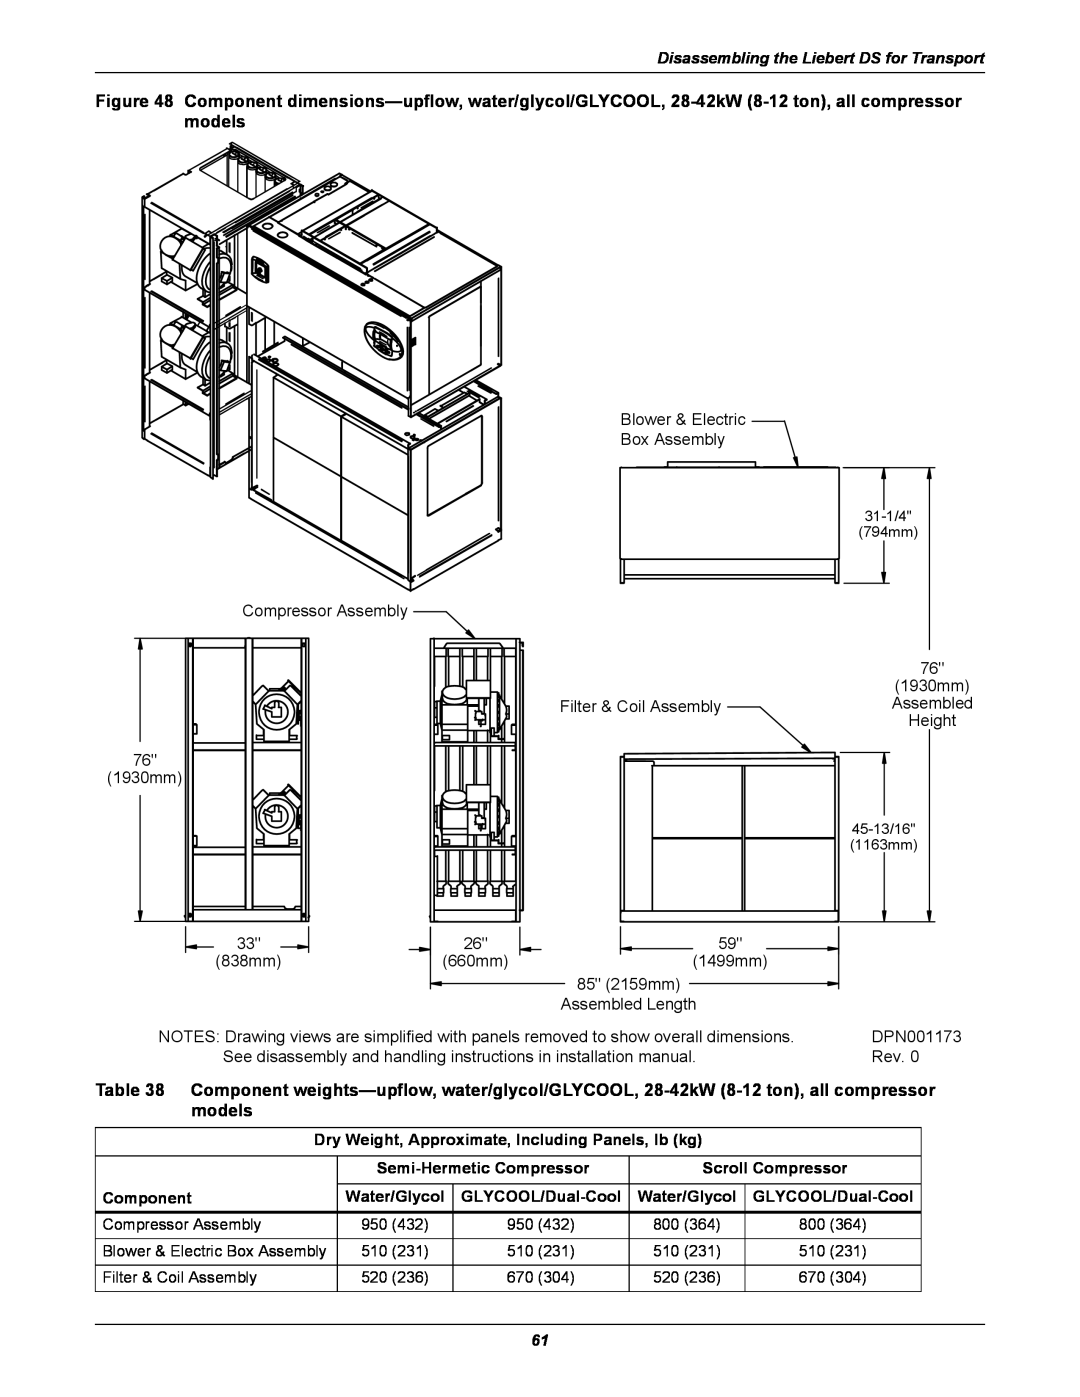 Liebert DS user manual Component dimensions-upflow, water/glycol/GLYCOOL, 28-42kW 8-12 ton, all compressor models 